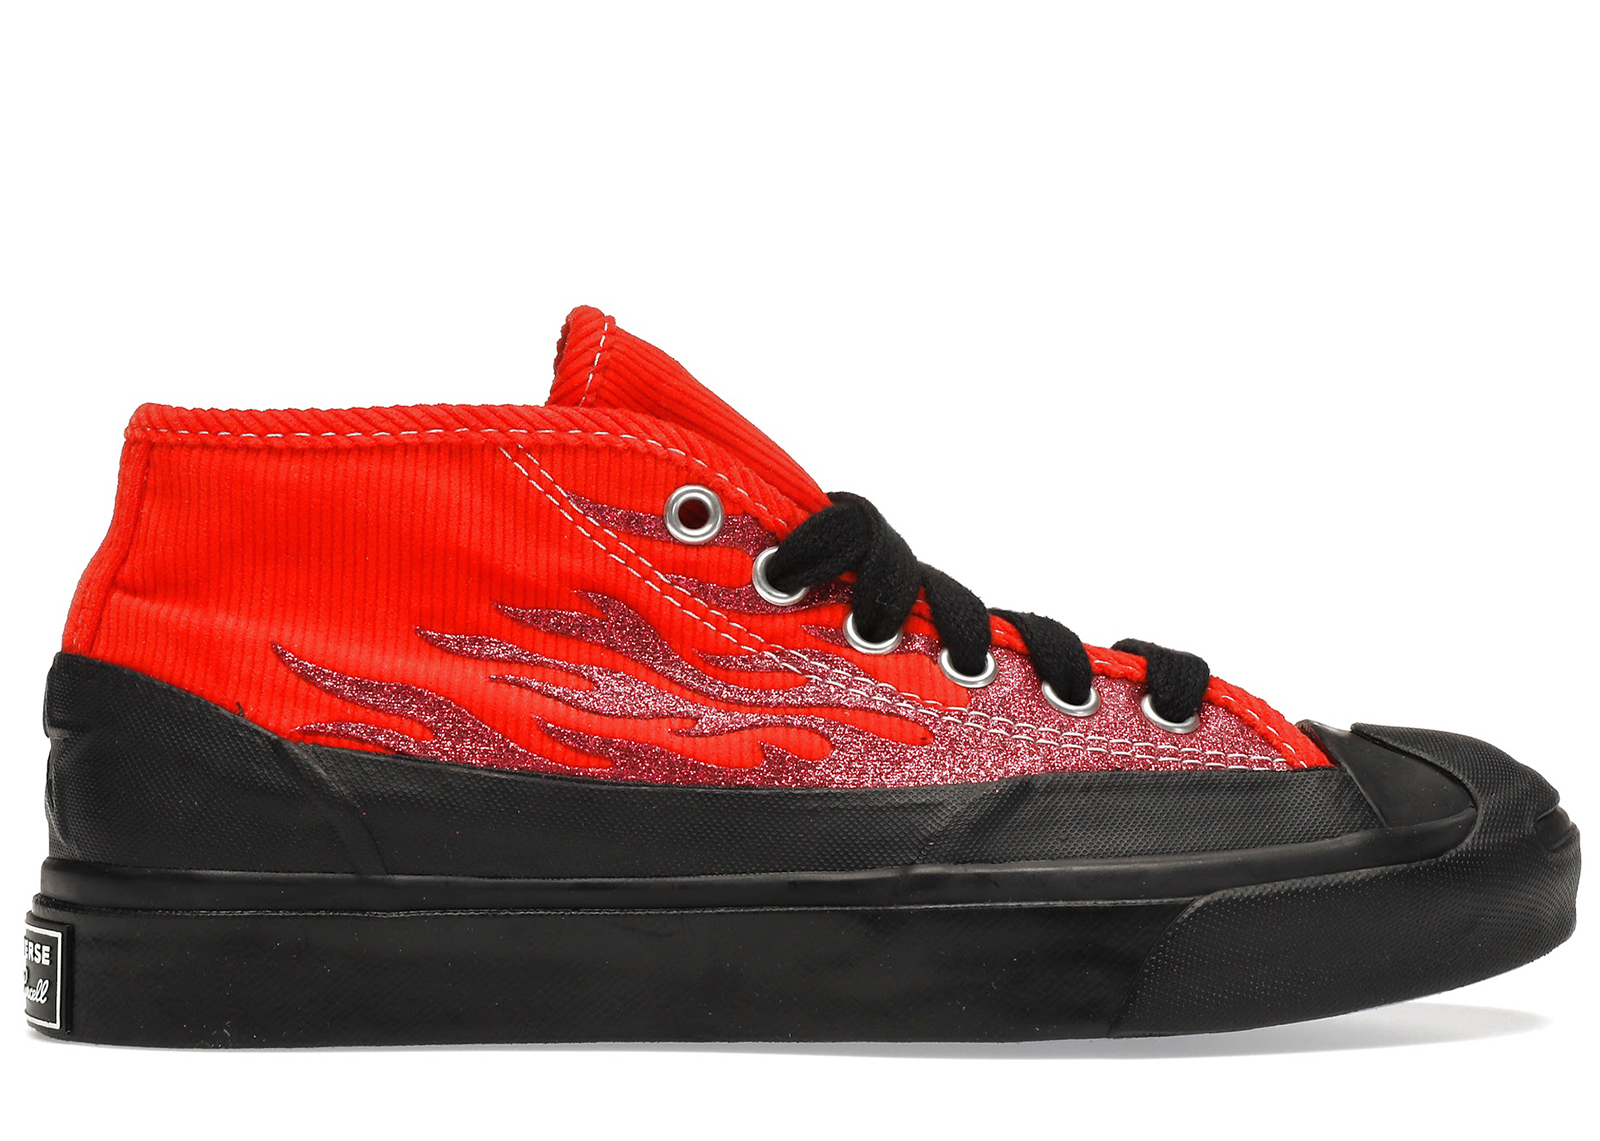 Converse Jack Purcell Chukka Mid ASAP Nast Red